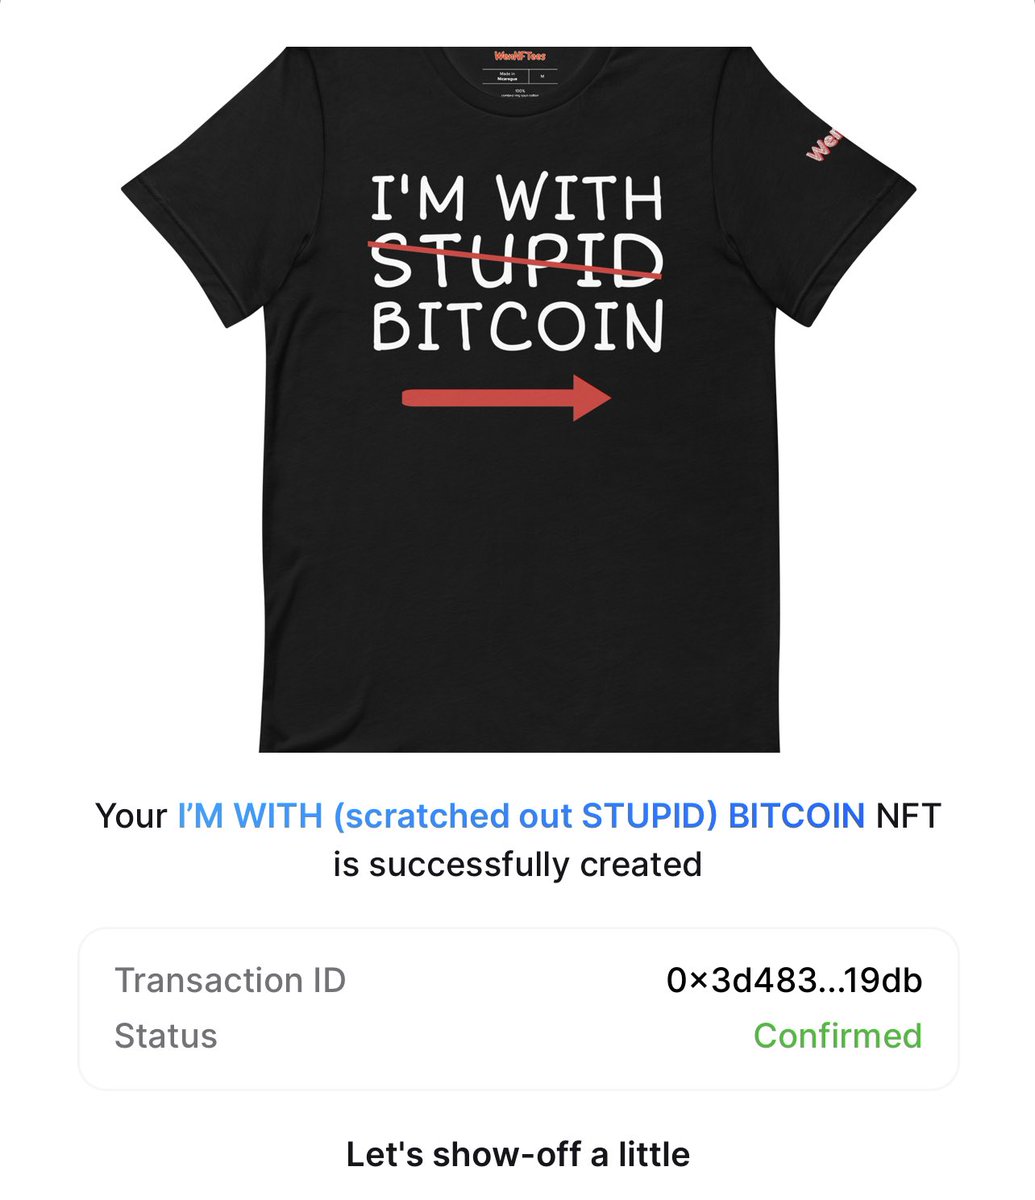 LFG! Just minted the I’M WITH (scratched out STUPID) @Bitcoin variant #phygital #nft on @rarible! Soon to come to my online shop!

#builtonRarible #StandForRoyalties @WenNFTees @wennftcom